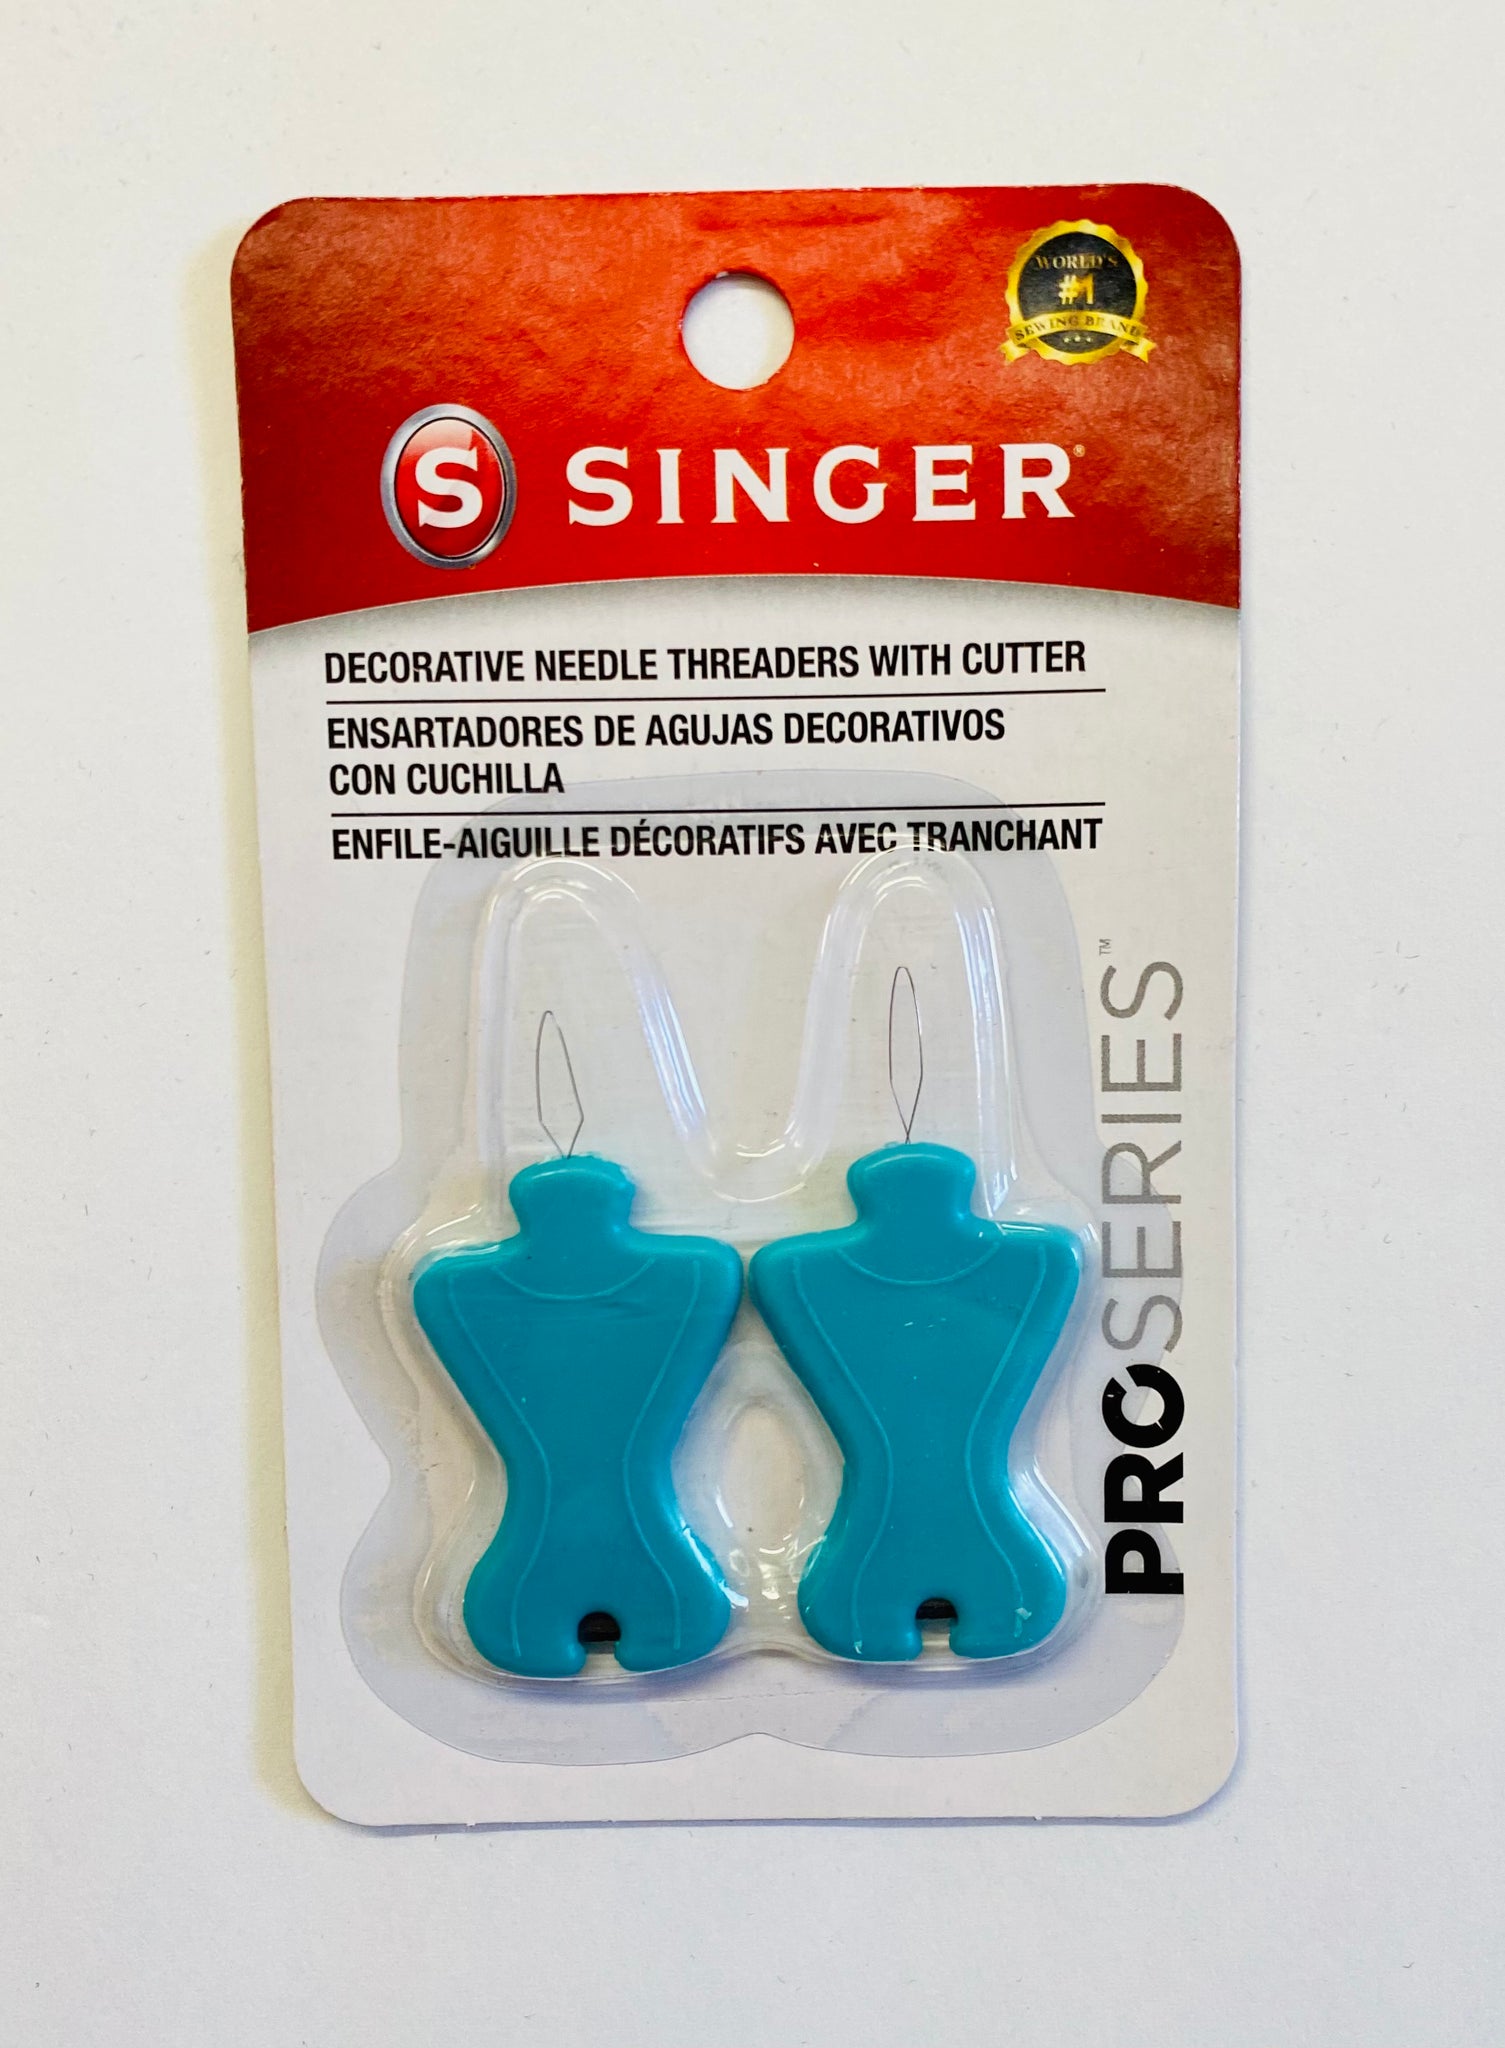 Singer Needle Threaders With Cutter